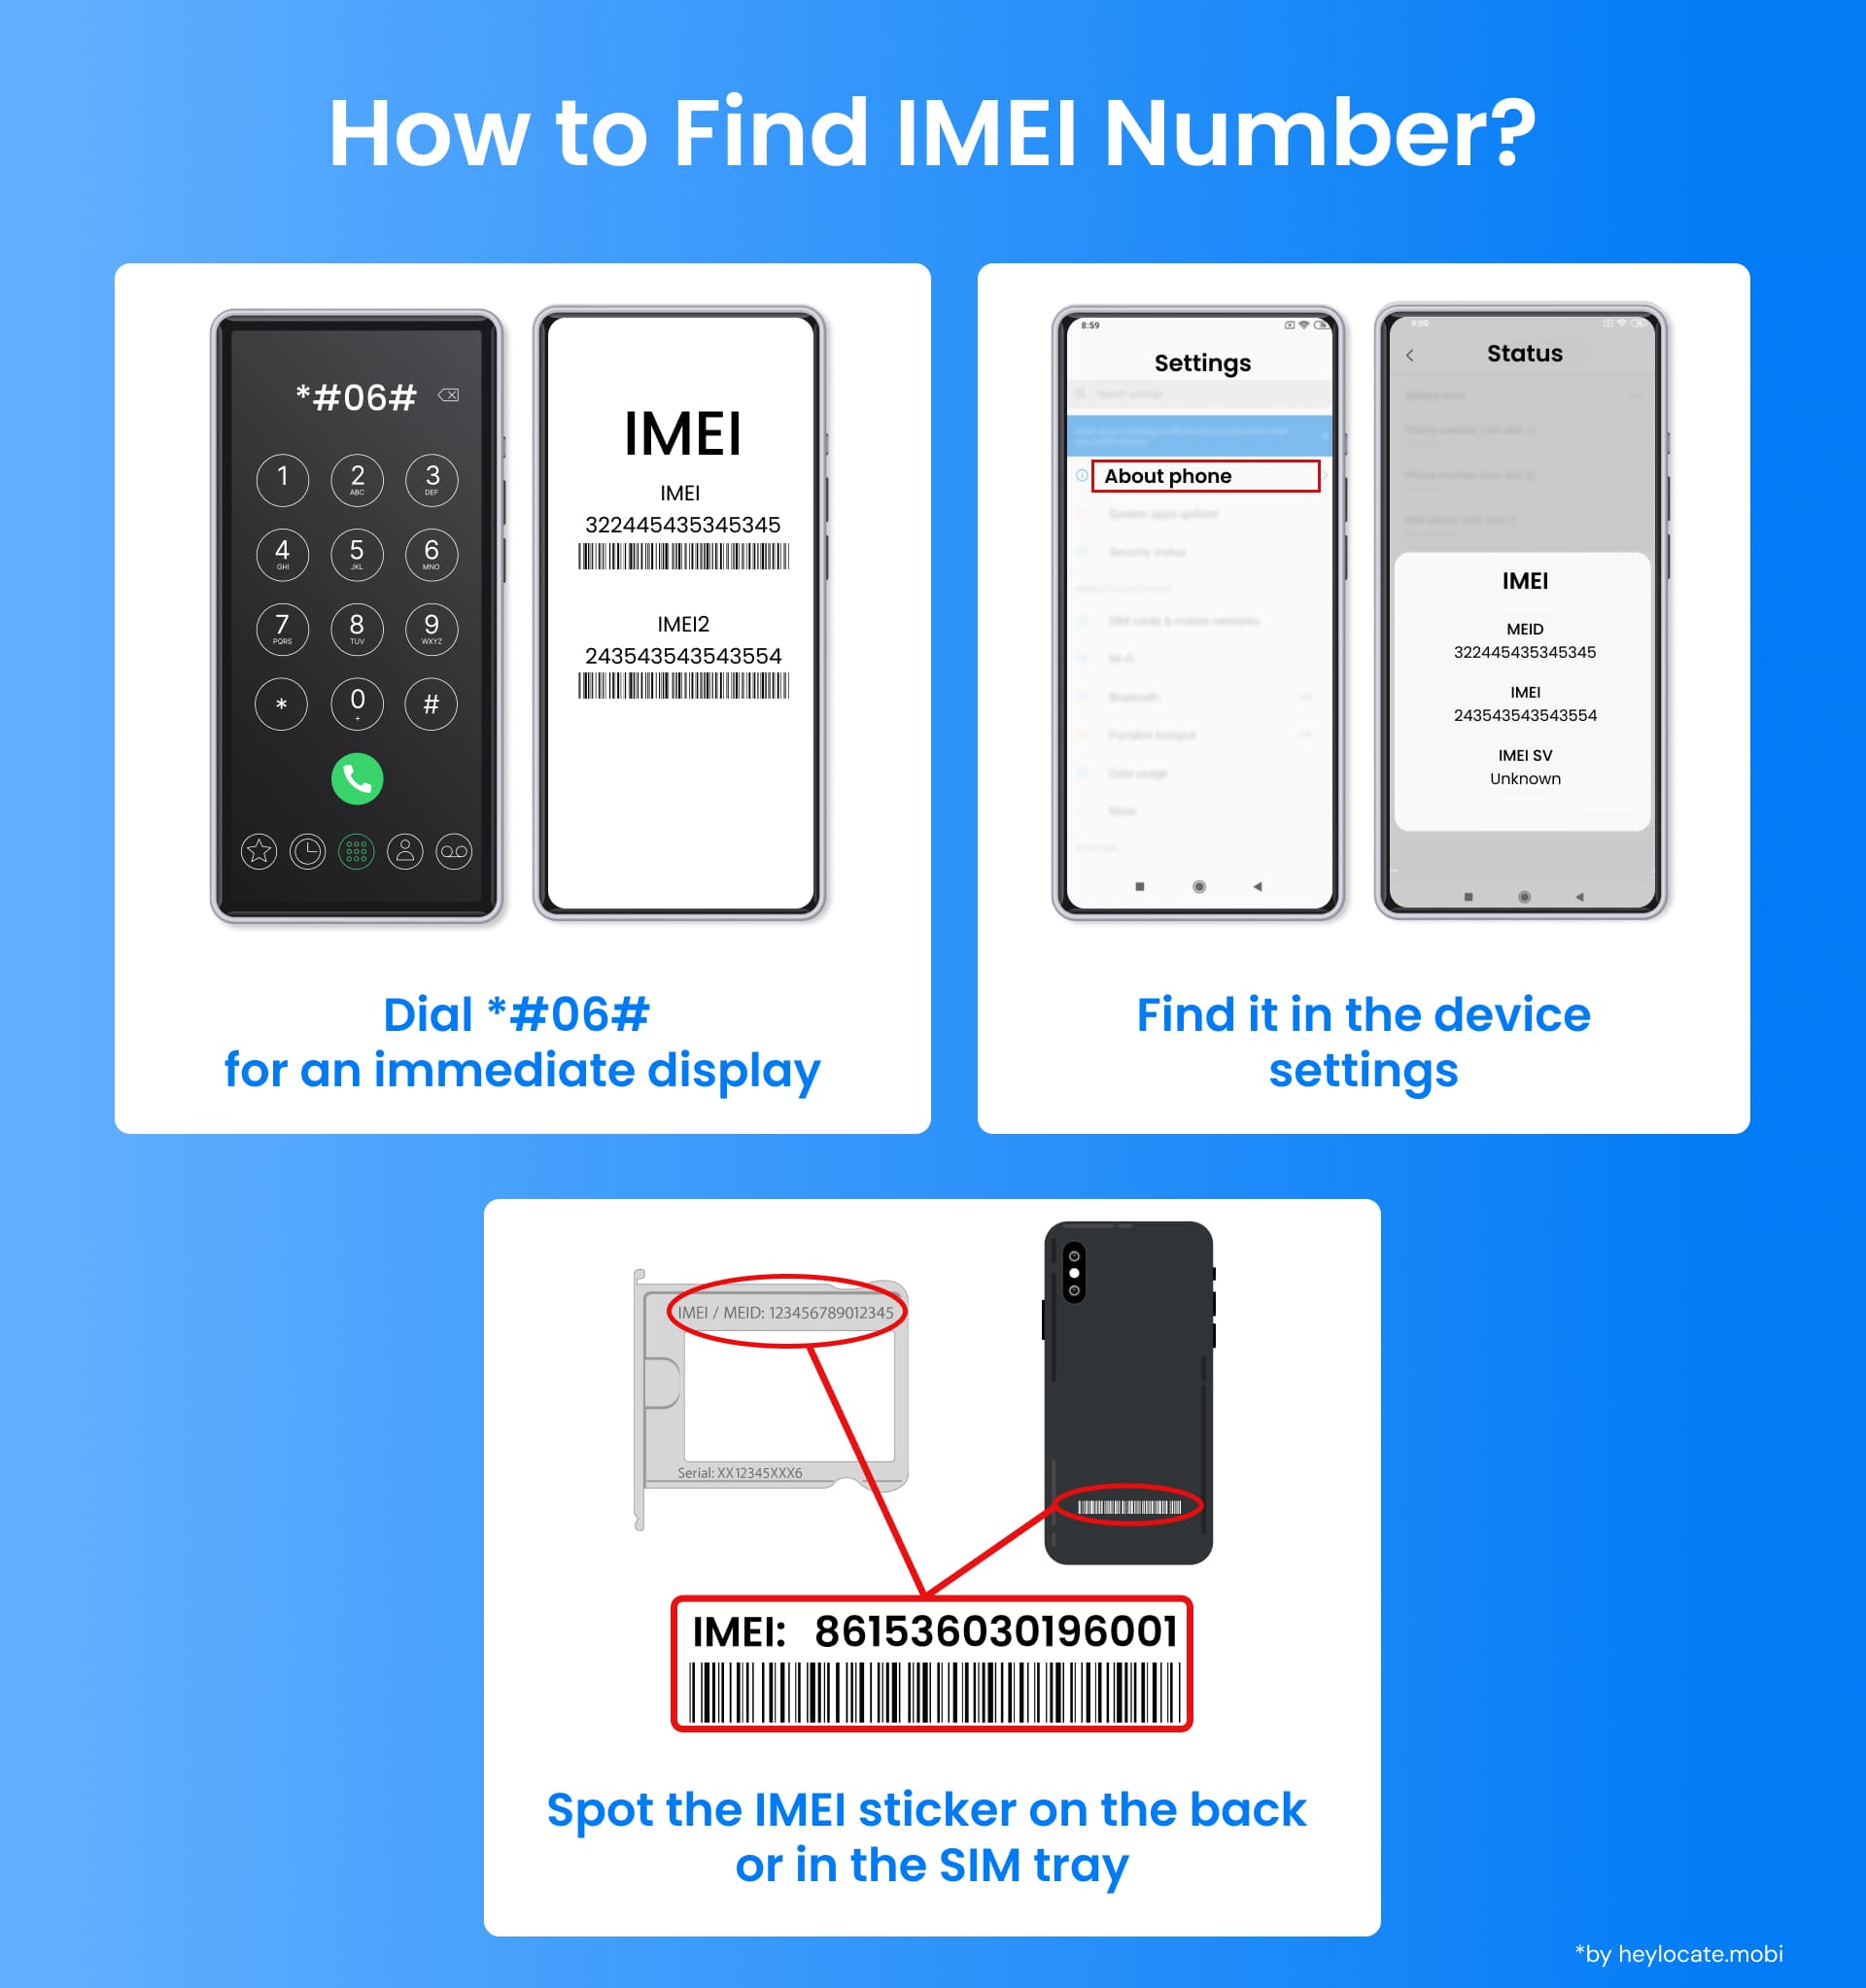 Visual guide on how to find a phone's IMEI number through dialing a code, device settings, or on the device itself